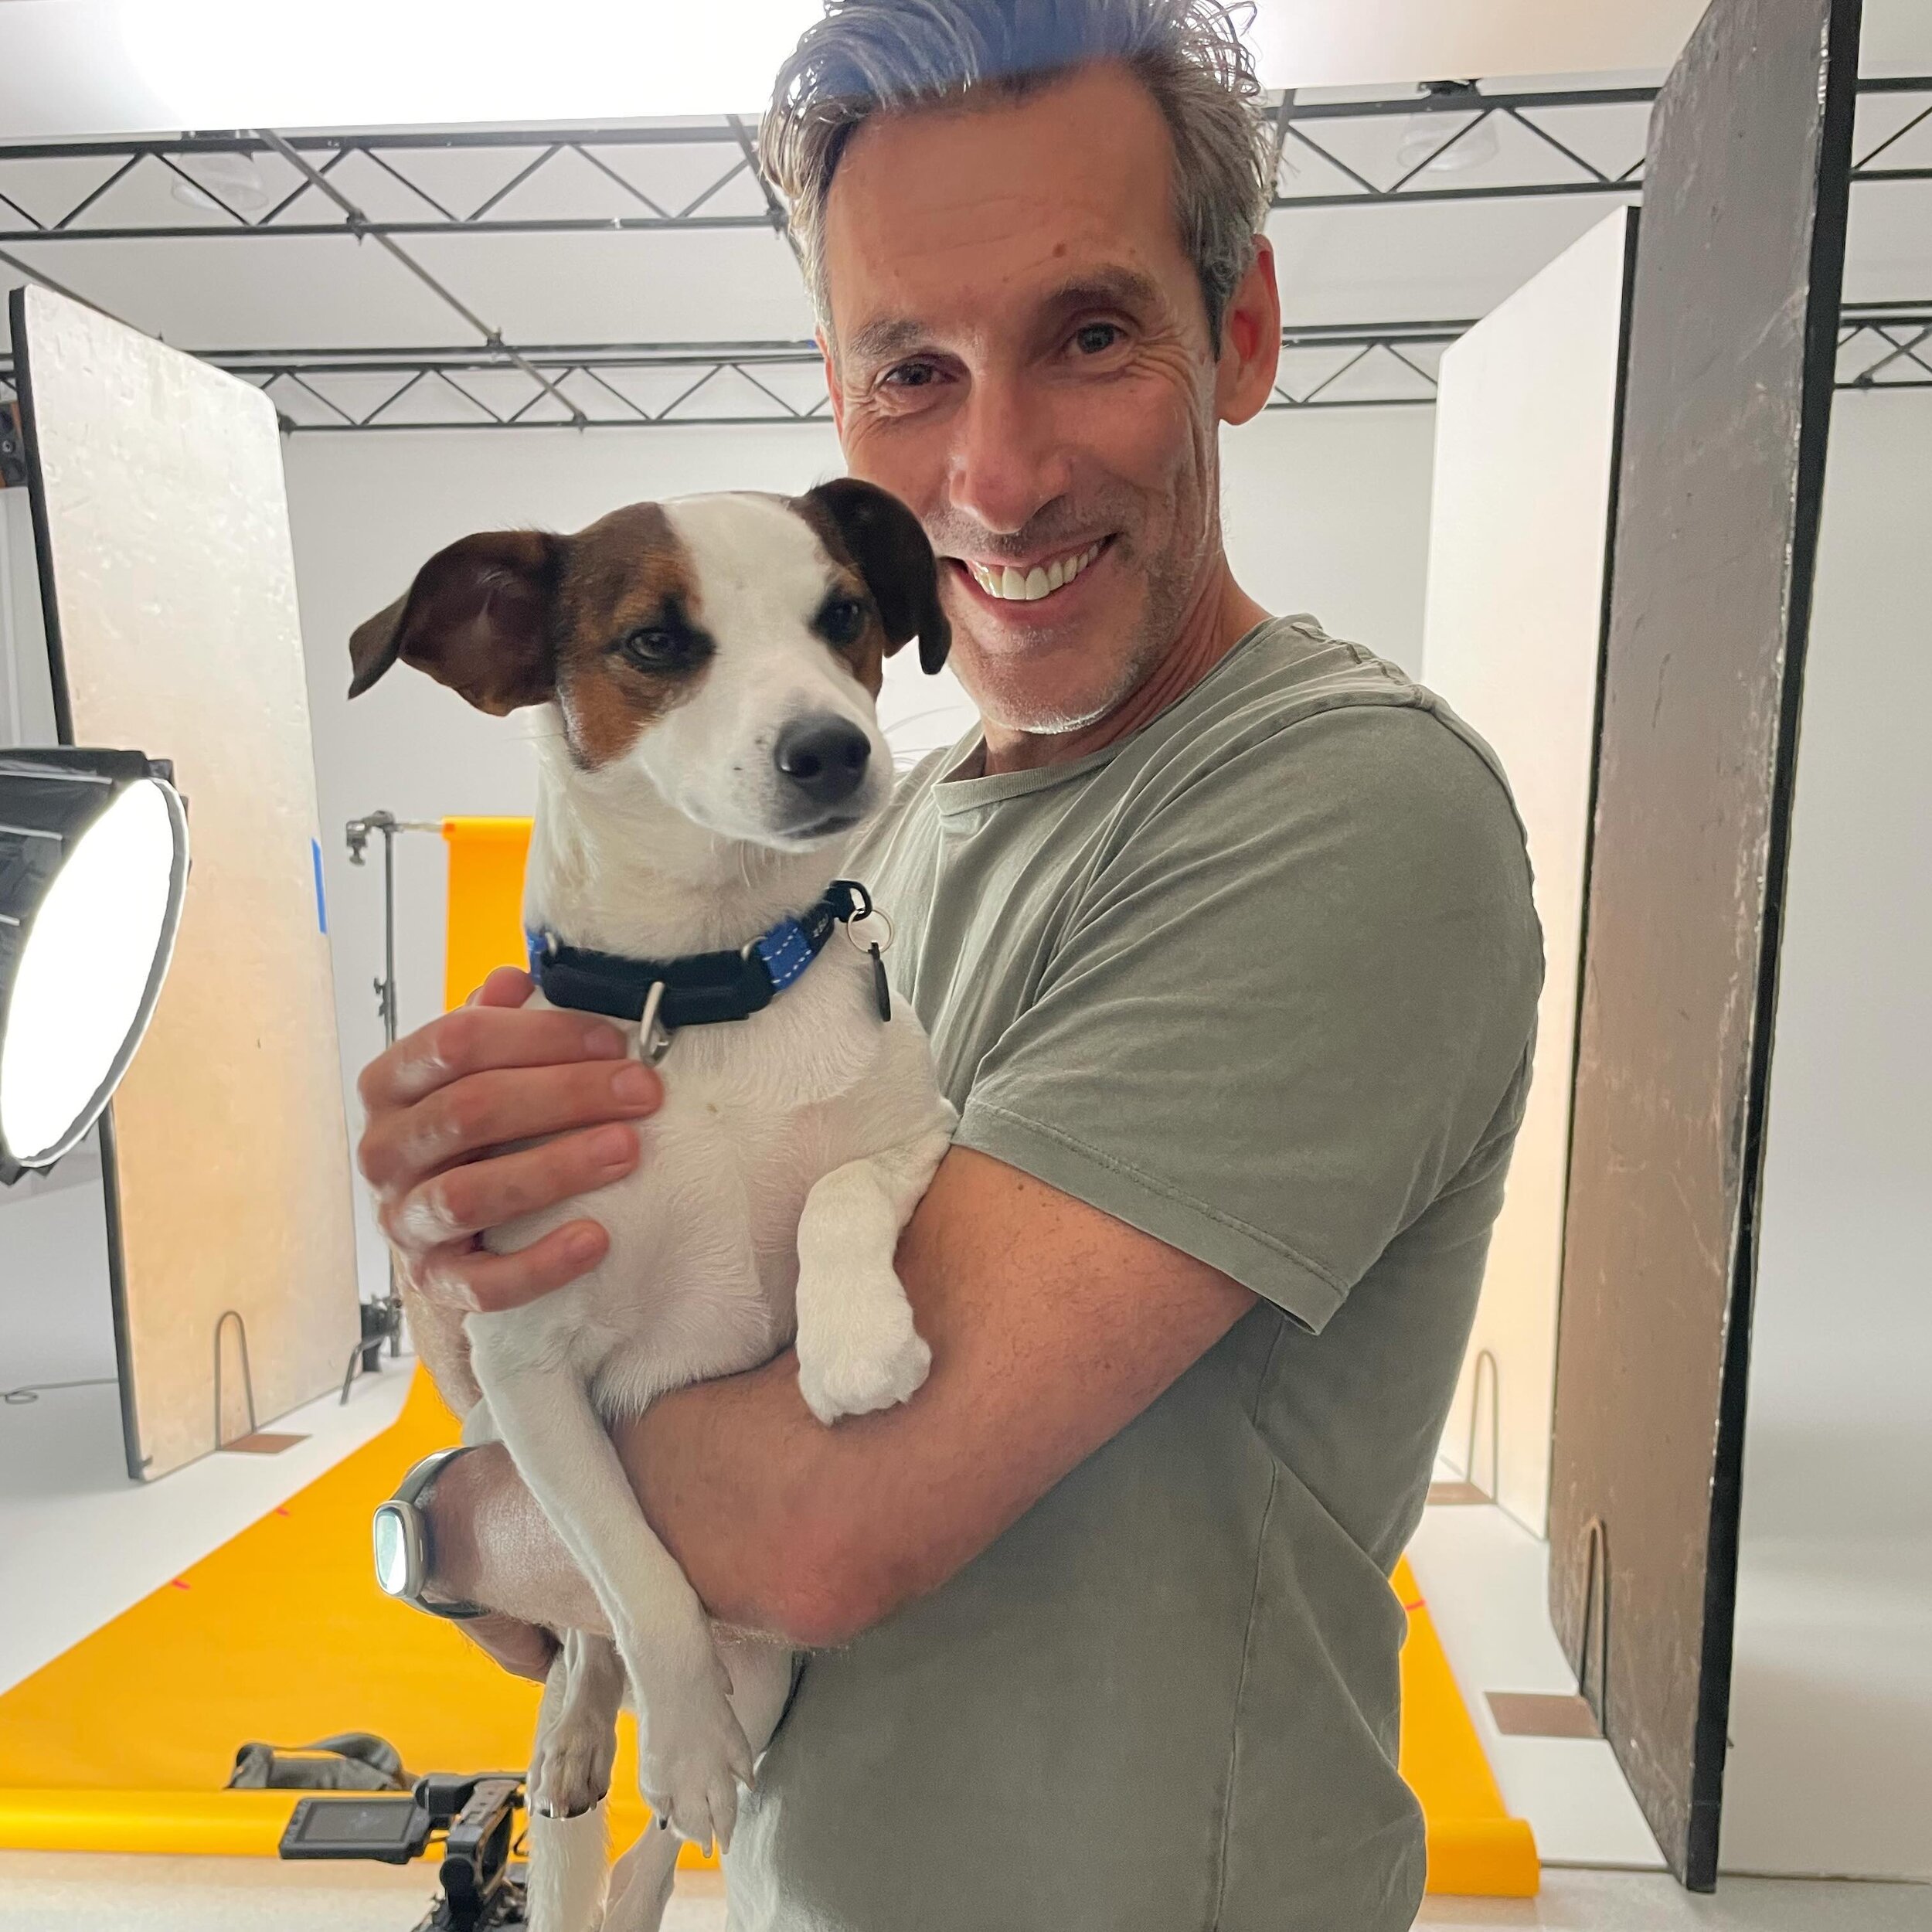 This is Ozzie, what a top bloke to hang out on set with, and made my day very easy. Thanks Ozzie! The Pedigree yellow paper roll framed us both nicely too!